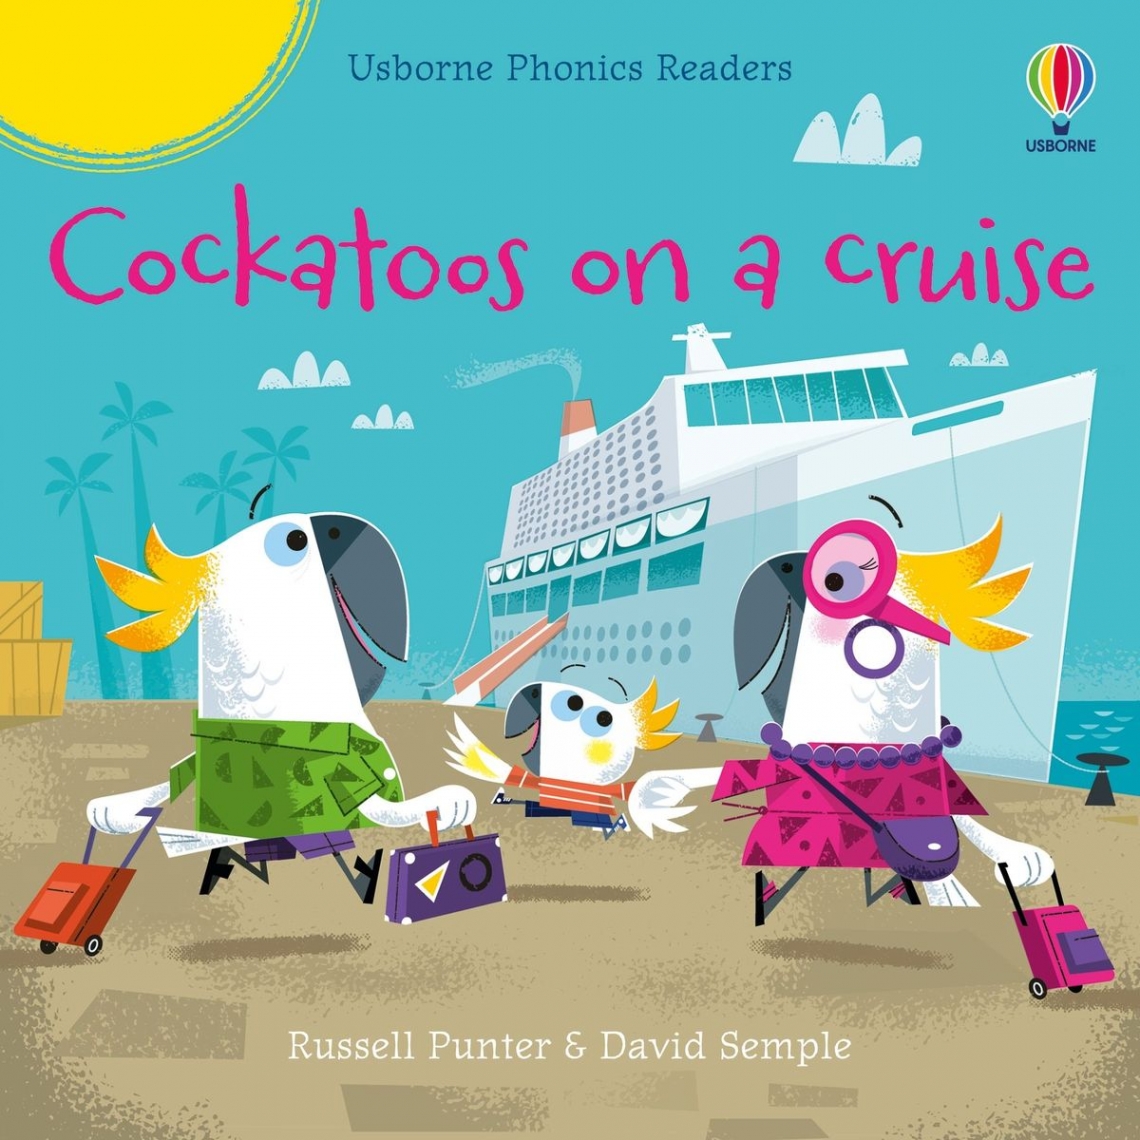 Russell Punter Usborne Phonics Readers Cockatoos on a cruise 